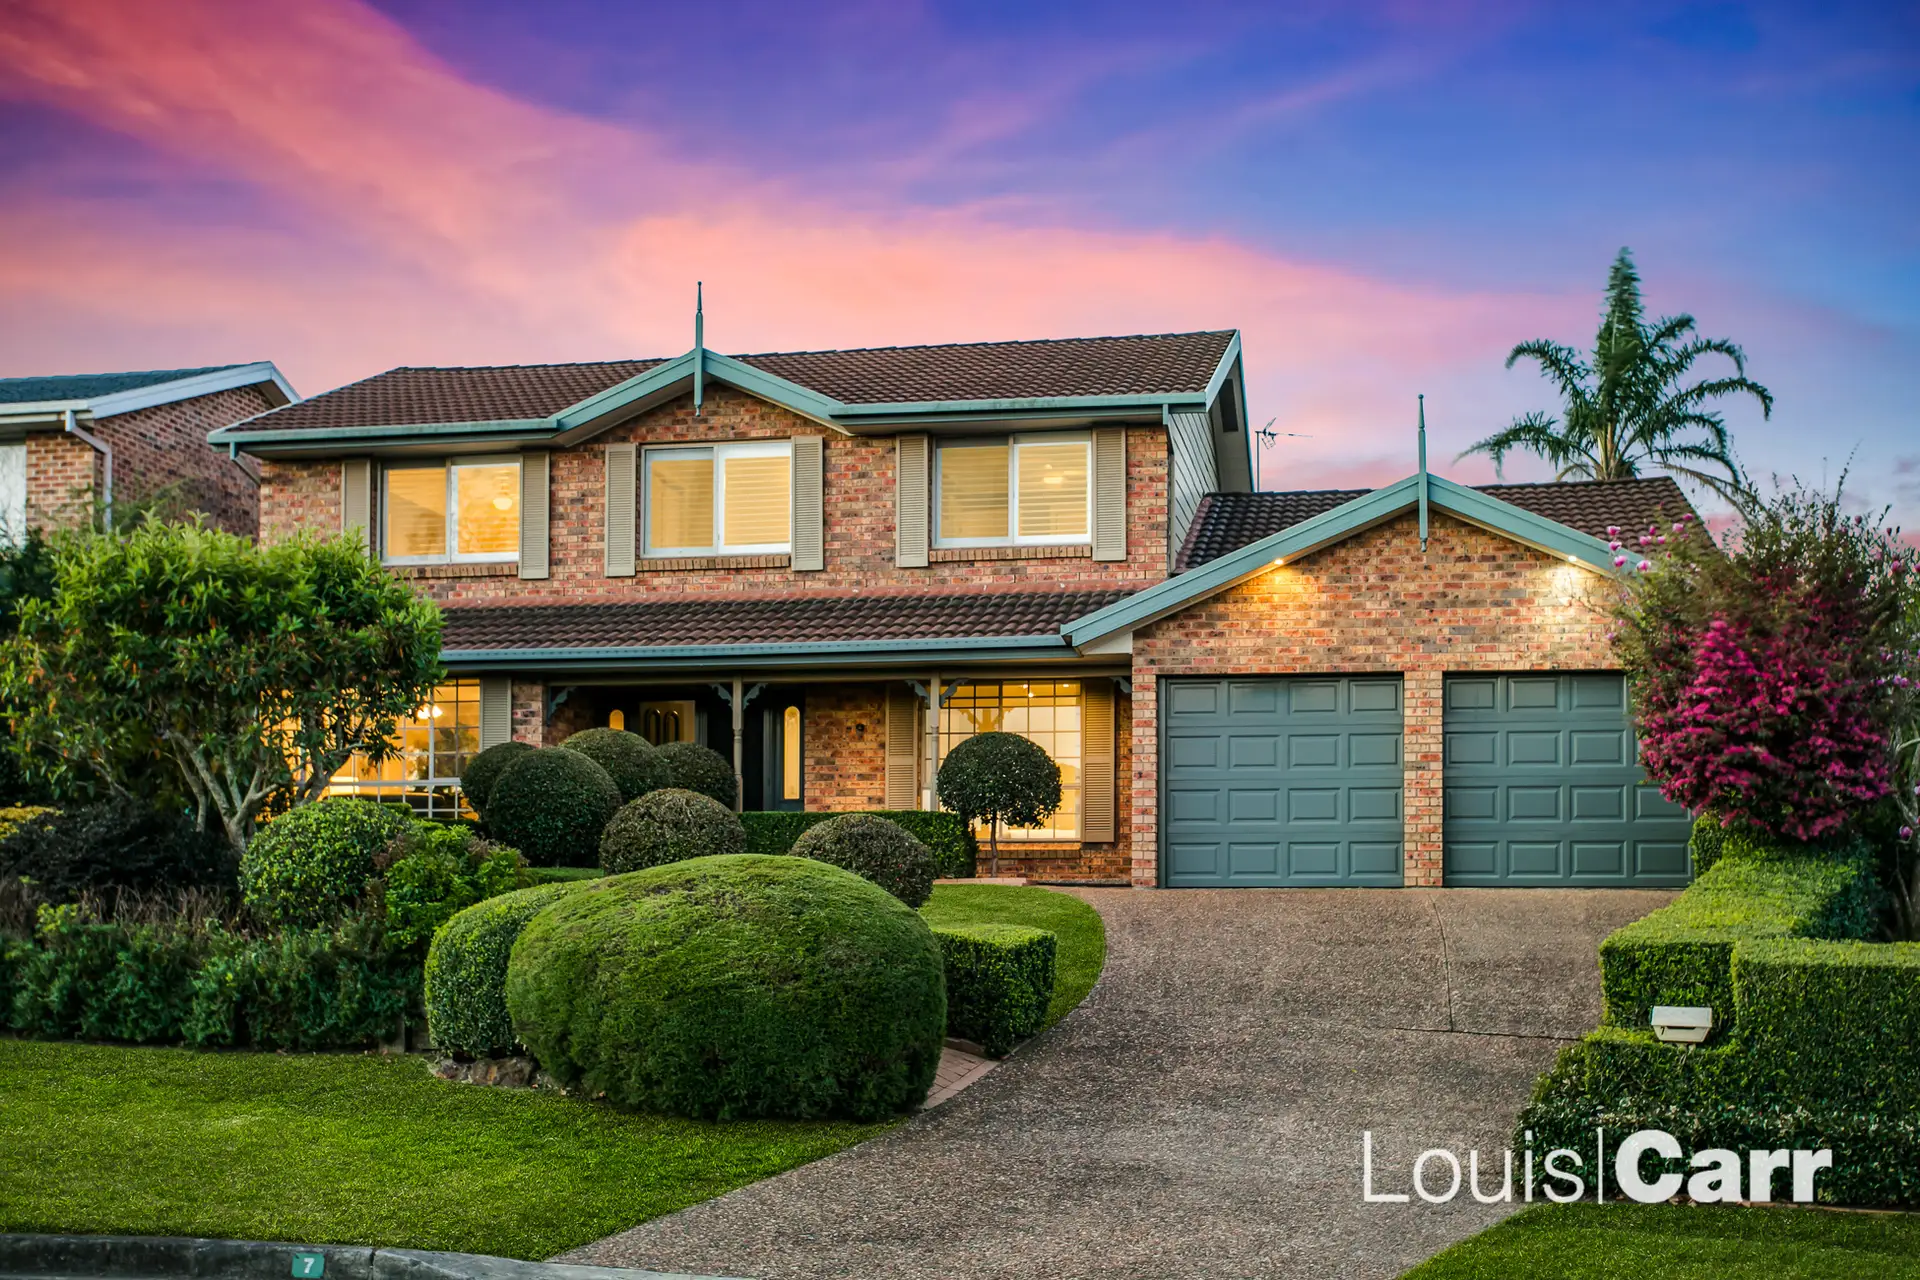 Photo #1: 7 Sanctuary Point Road, West Pennant Hills - Sold by Louis Carr Real Estate